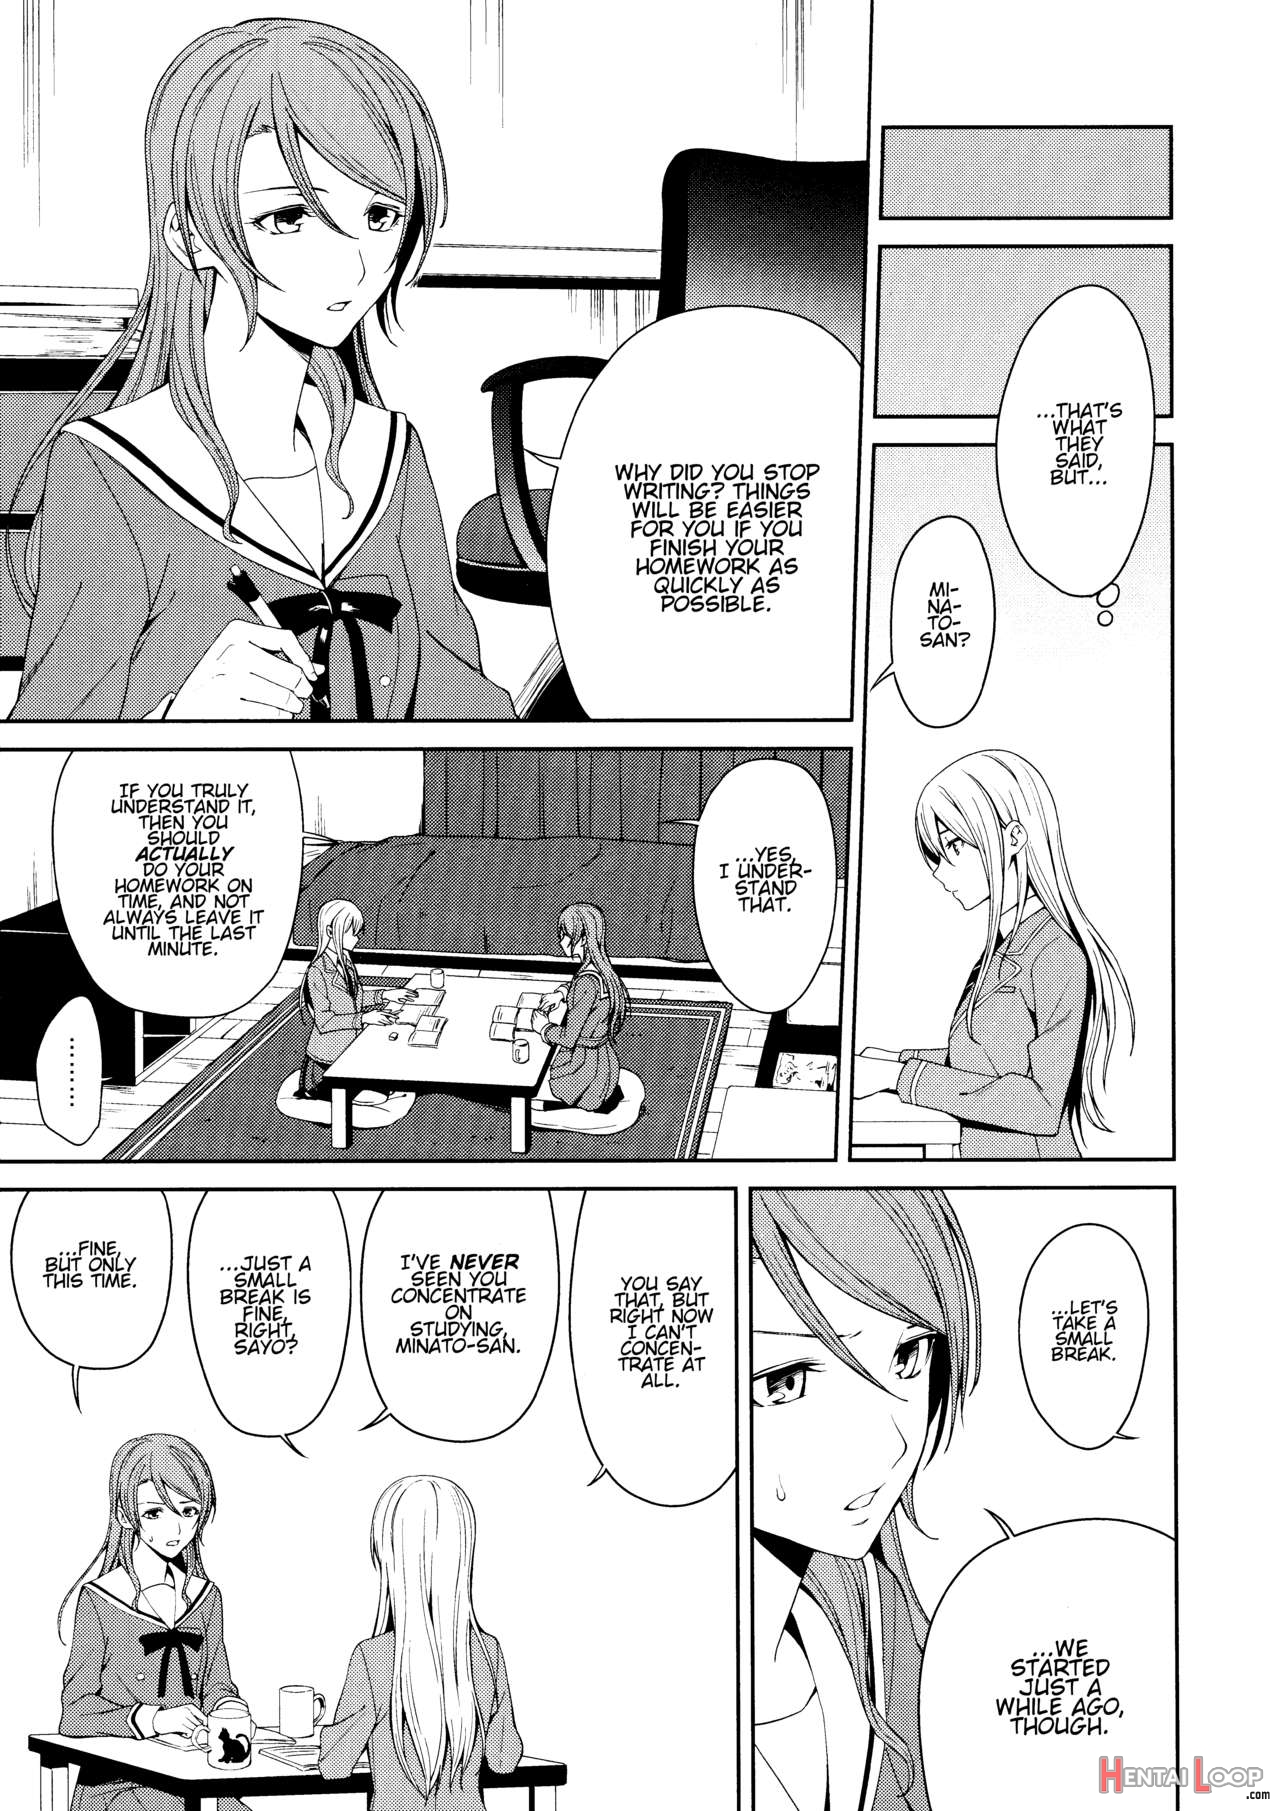 Honnou No Seishikata - How To Control Your Instincts page 6